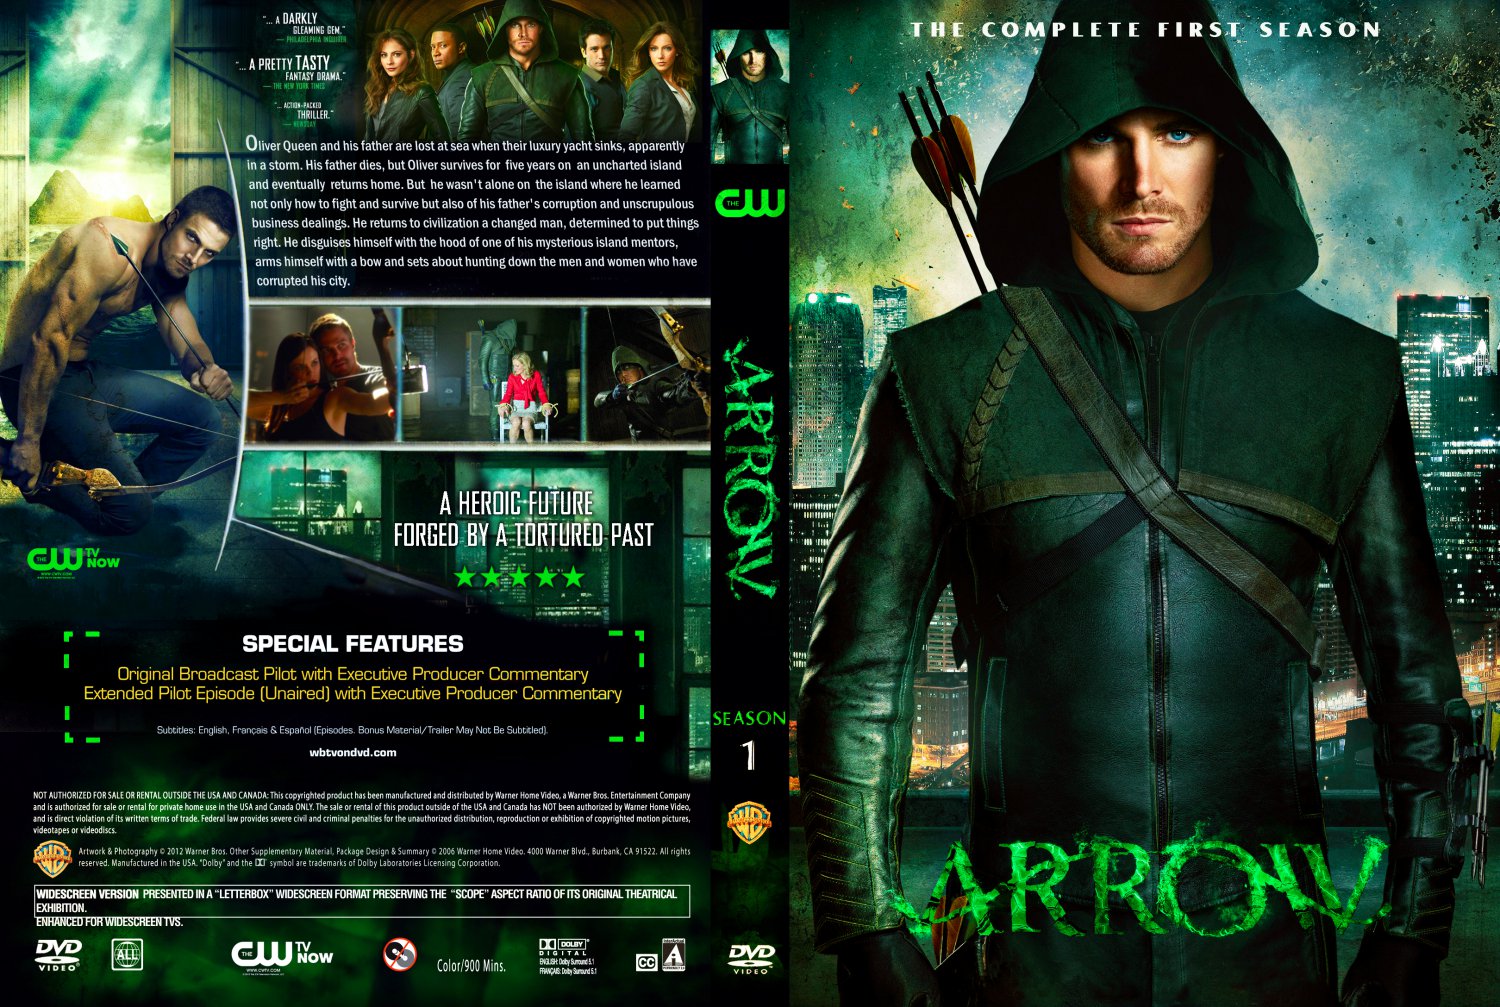 Arrow Season 1 DVD Blue Ray Cover front and back